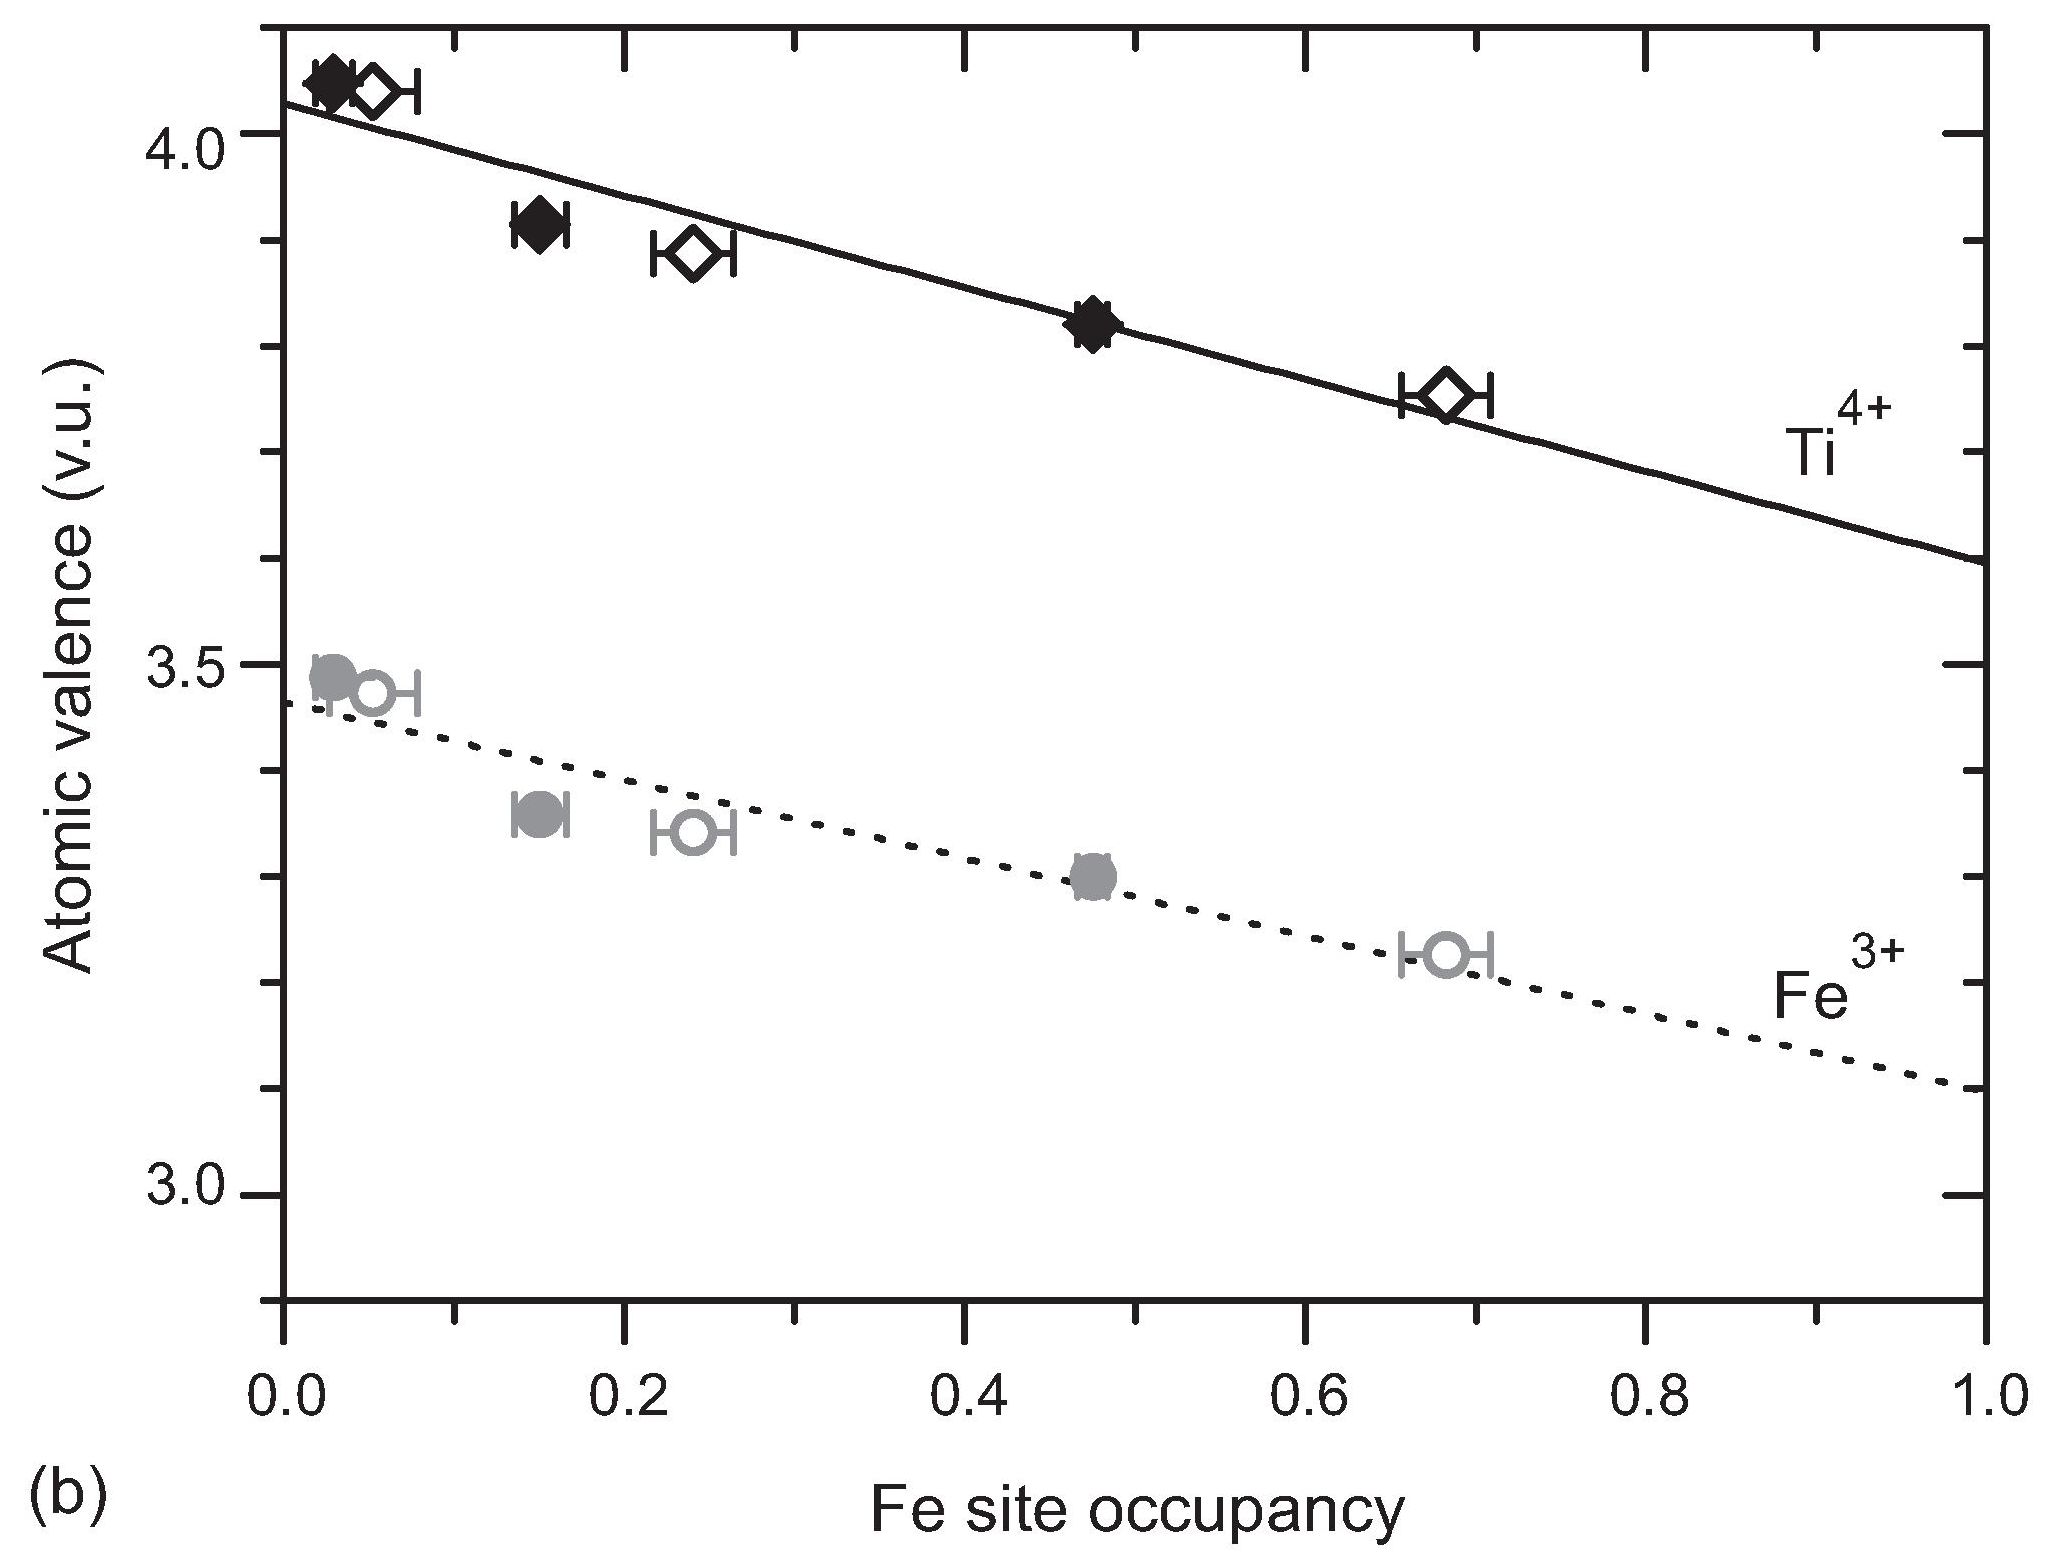 A figure of apparent atomic valences as a function of the site occupancy by Fe